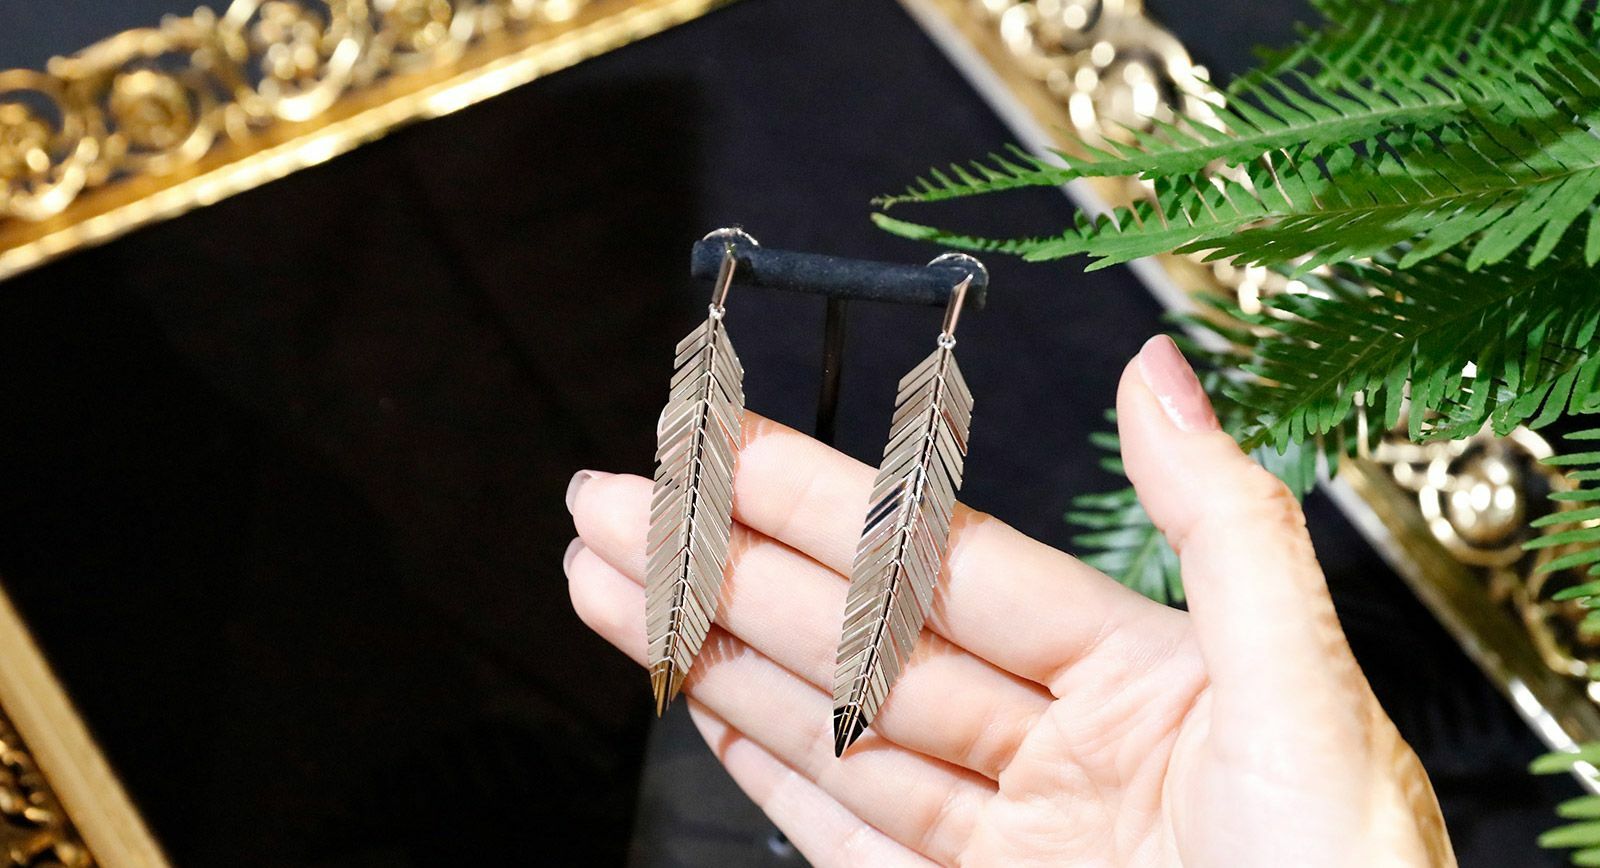 CADAR feather earrings from the Second Skin collection